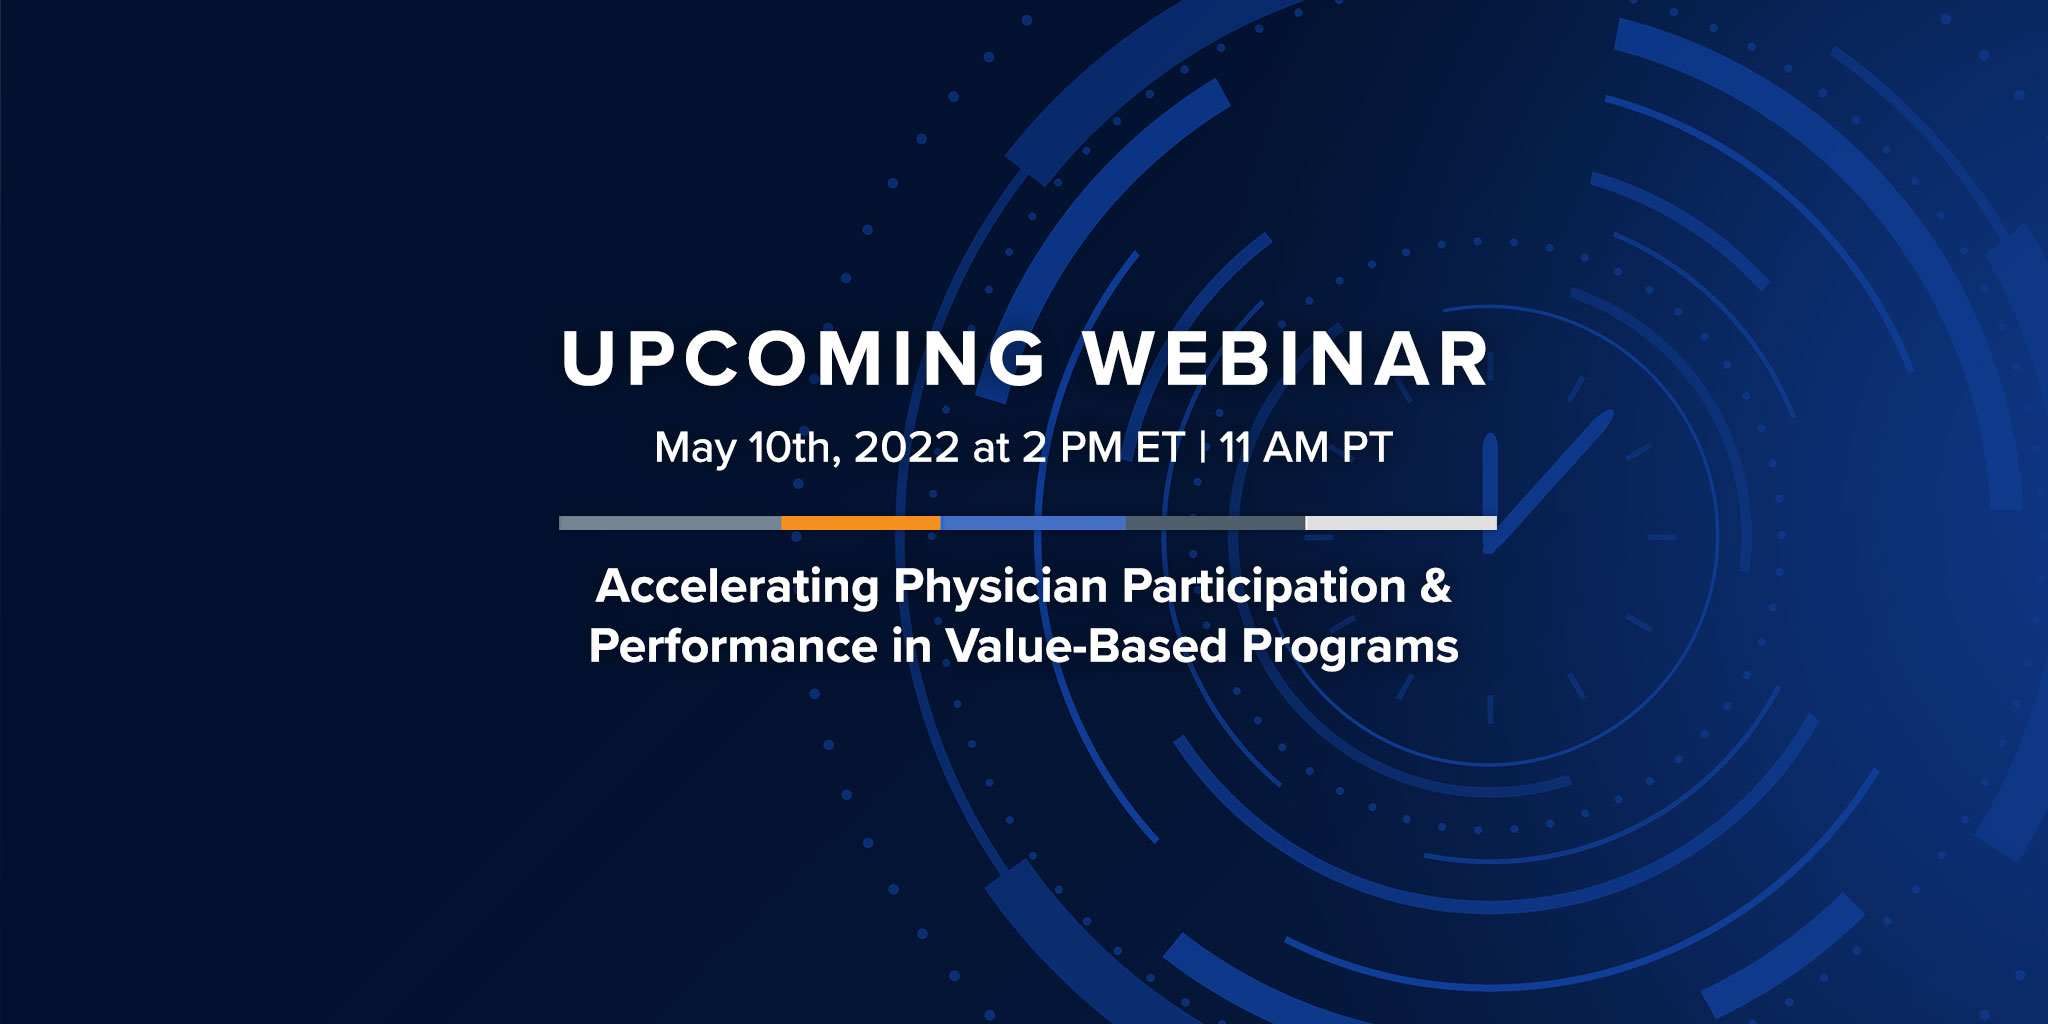 NantHealth Webinar May 10th 2022: Accelerating Physician Participation & Performance in Value-Based Programs